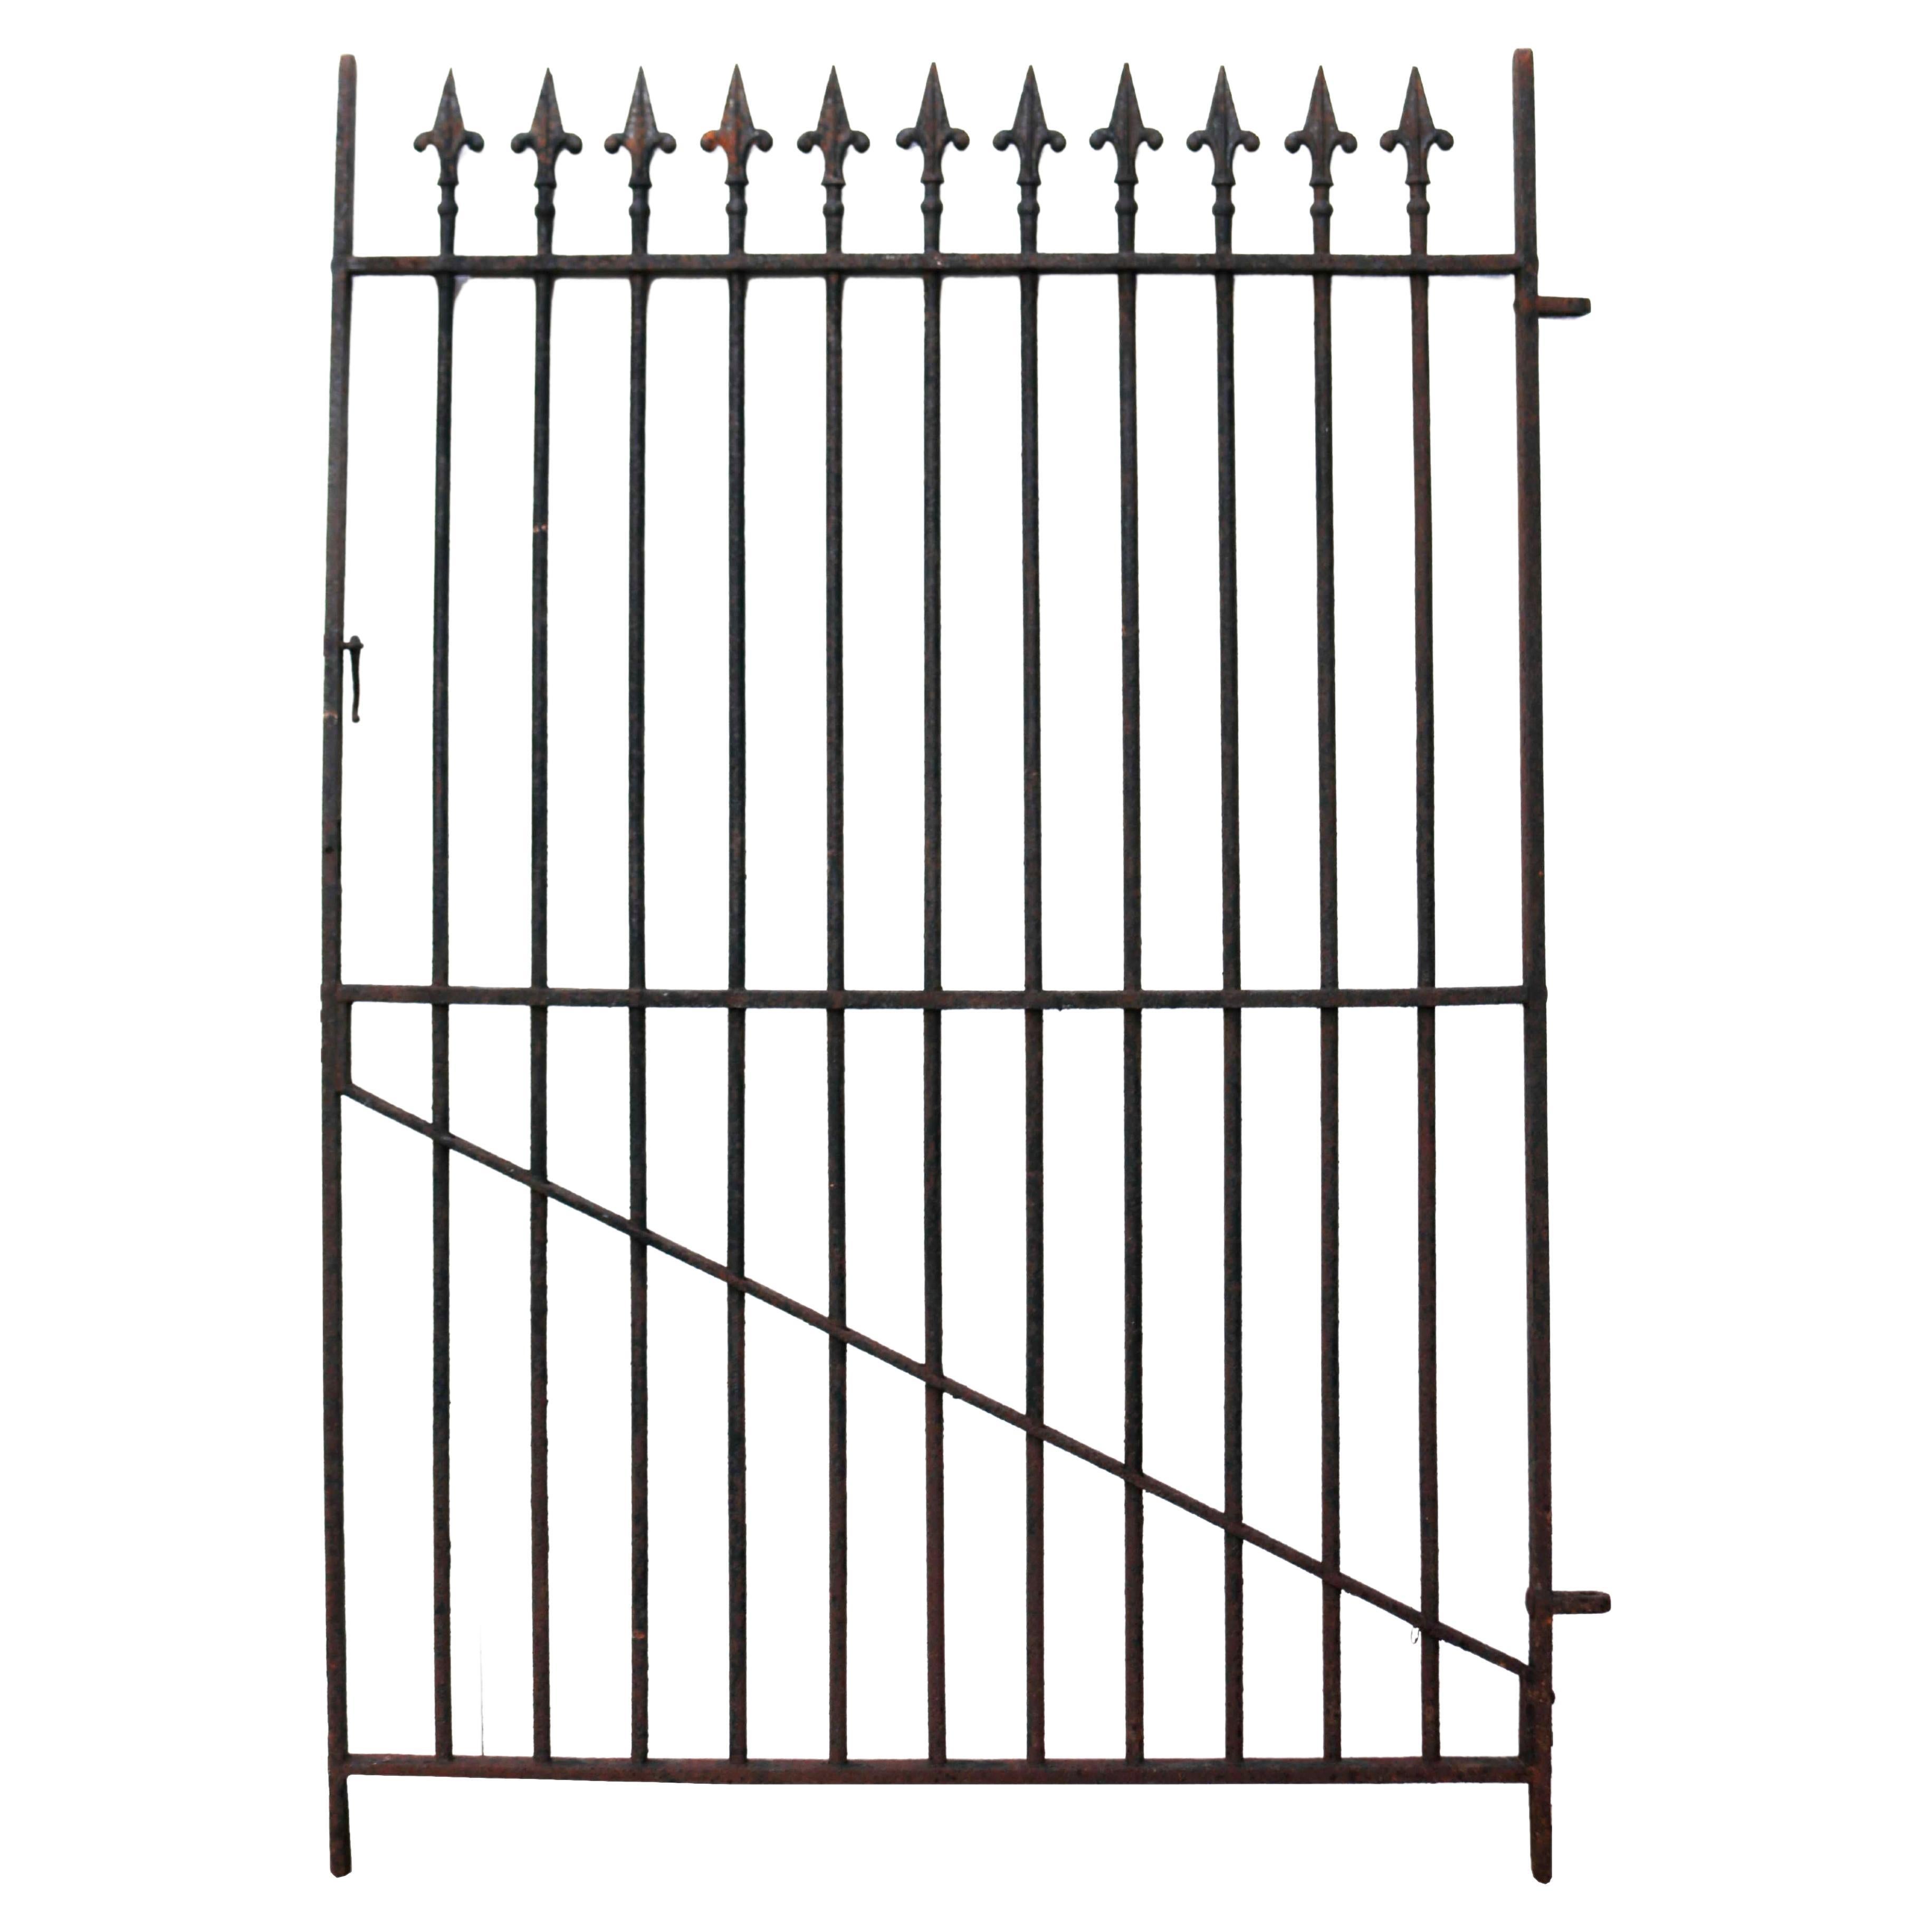 Antique Wrought Iron Gate with Decorative Finials